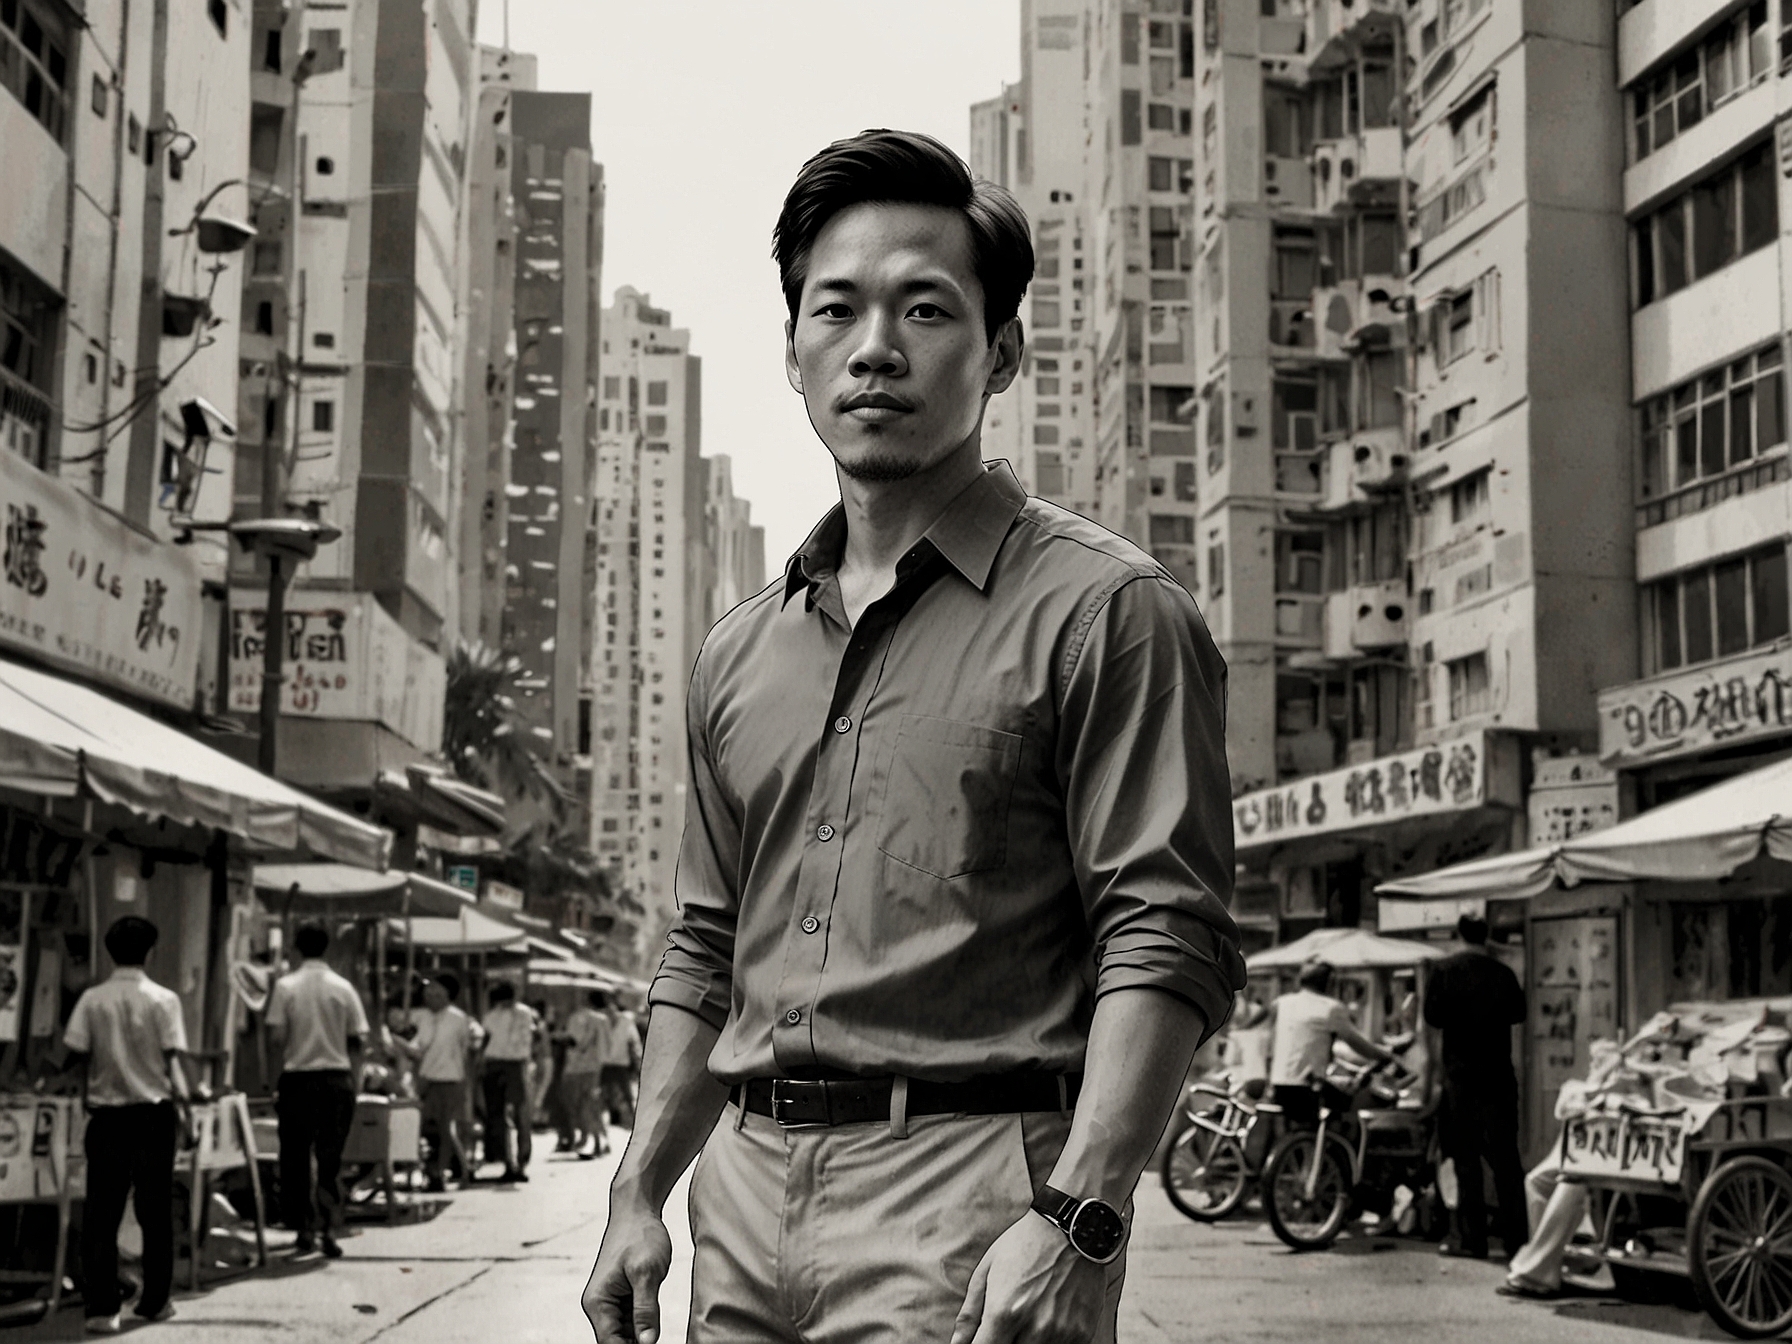 Byron Mann stands in front of iconic Hong Kong landmarks, including bustling street markets and towering skyscrapers, highlighting the city's vibrant essence in his film The Modelizer.